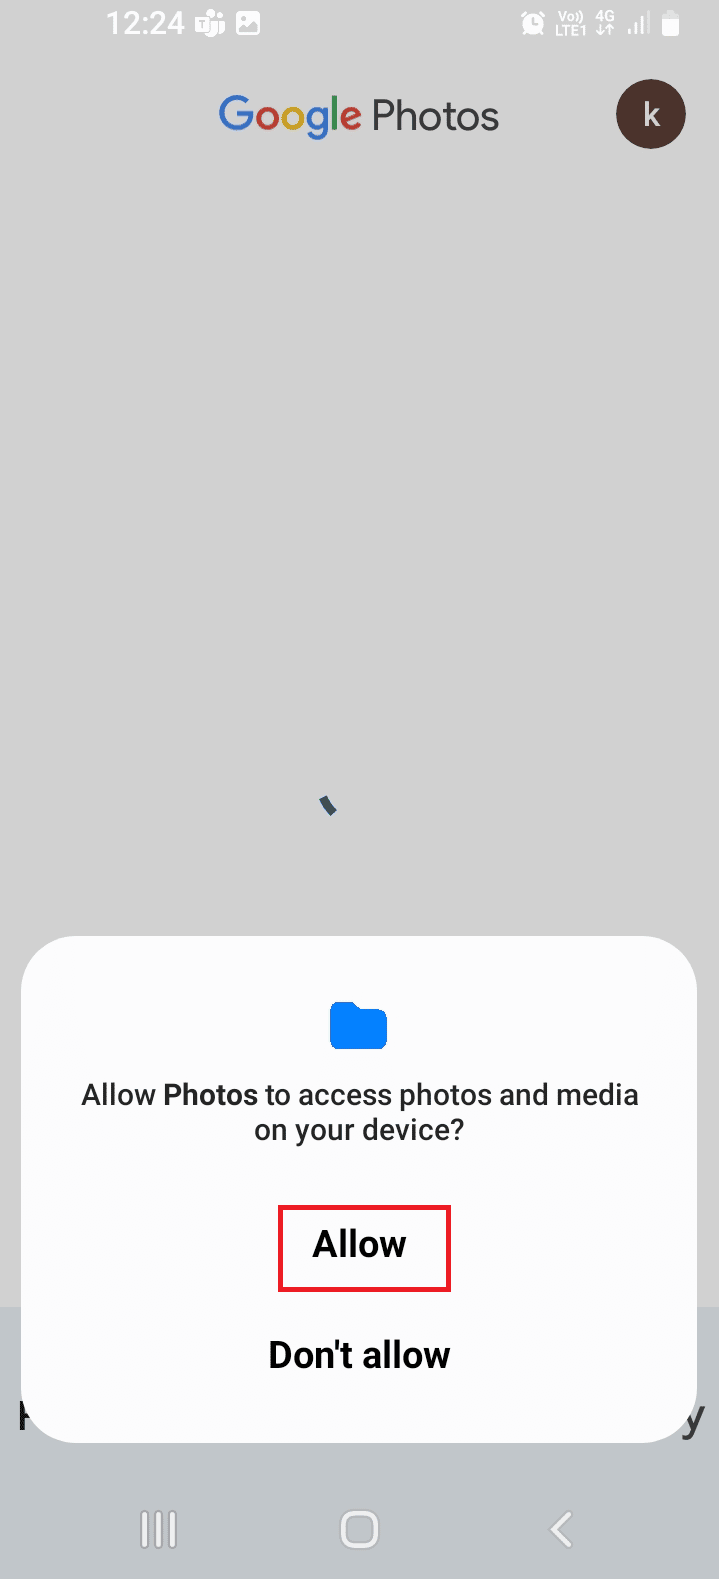 Open the Google Photos app and tap on the Allow option